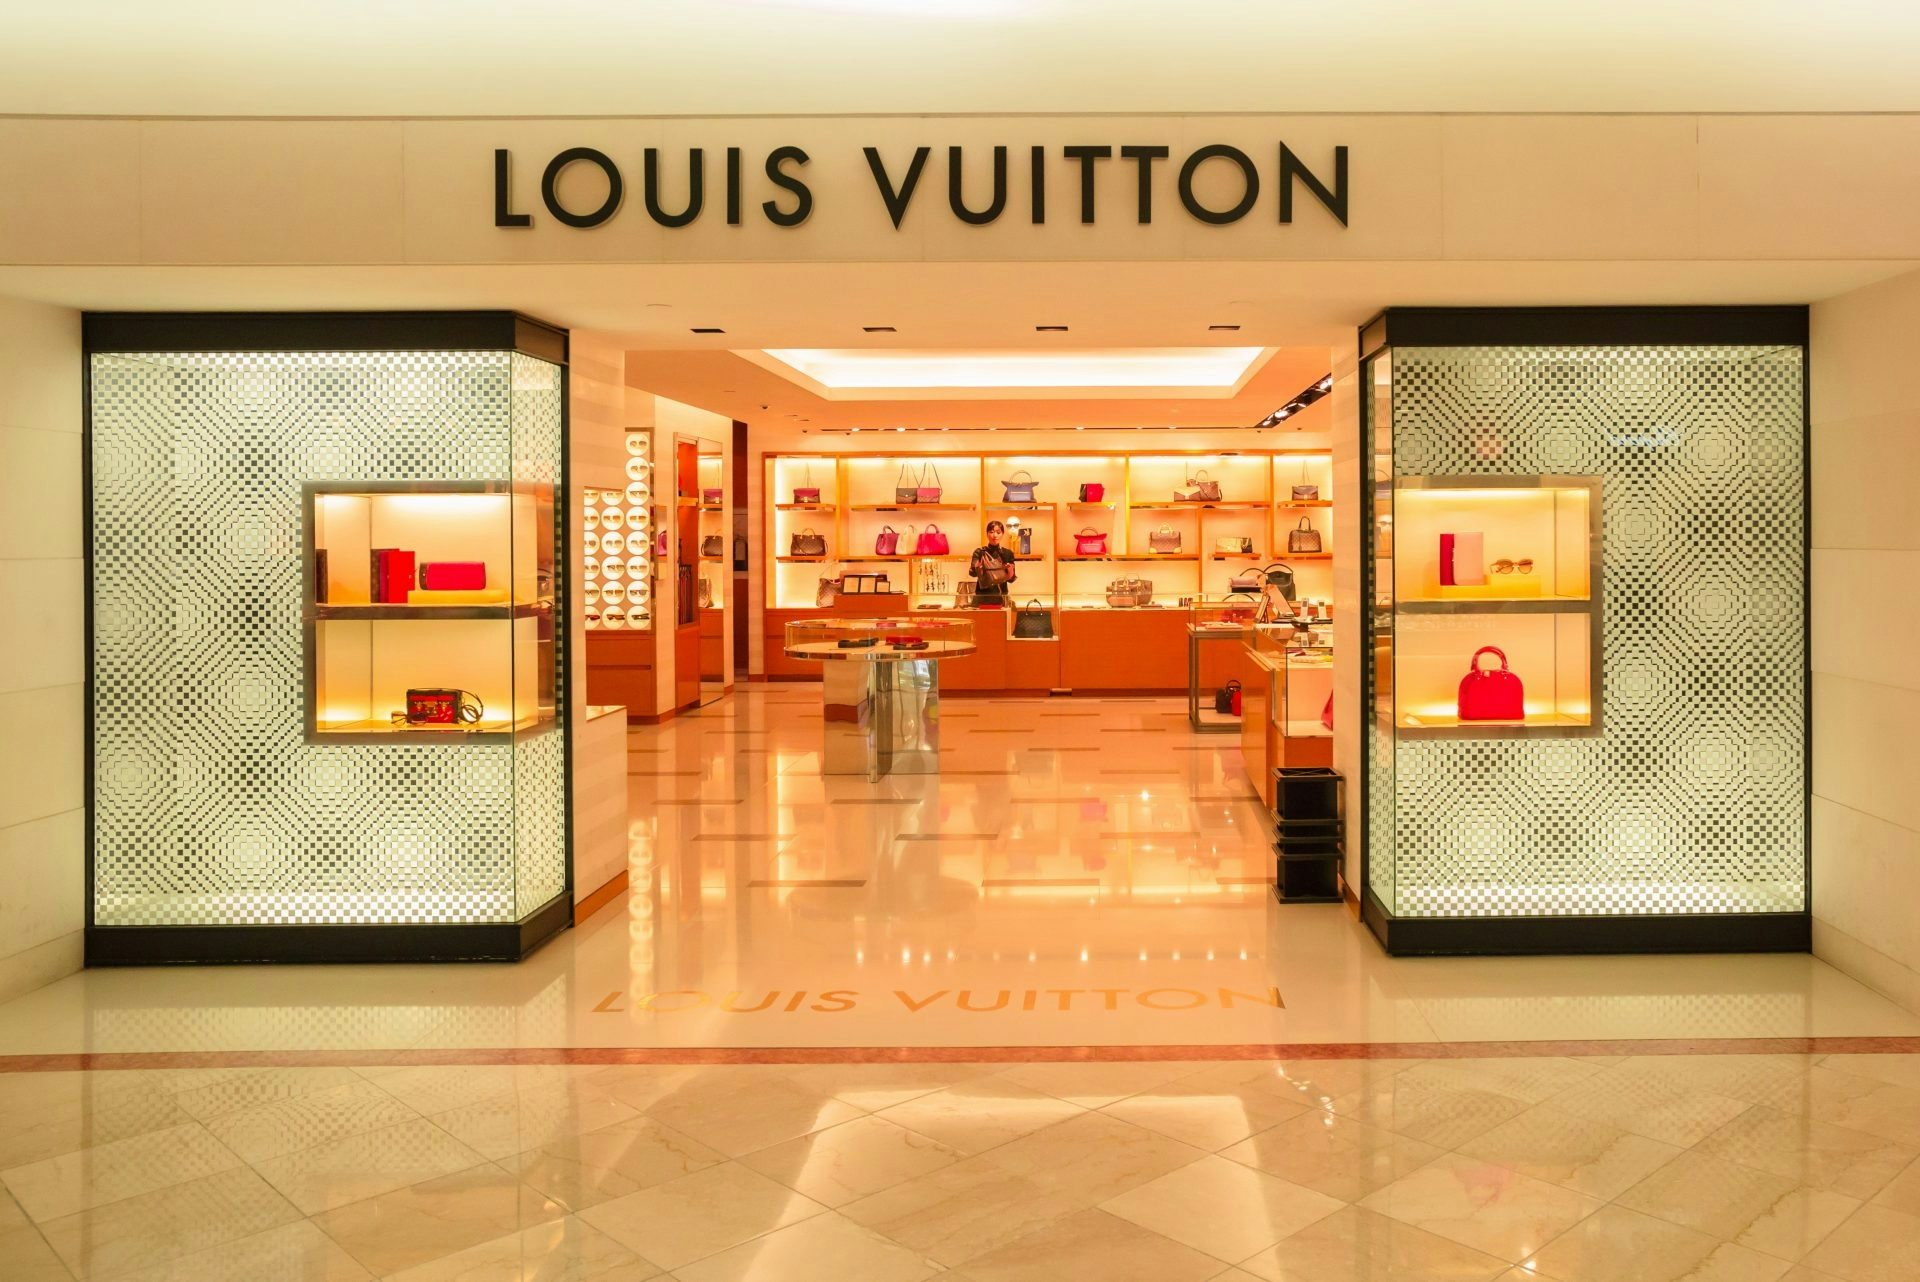 The Louis Vuitton shop inside the Dongwha Duty Free department store in Seoul. Korean duty-free retailers have suffered since the deployment of the THAAD system in March. Photo: Shutterstock